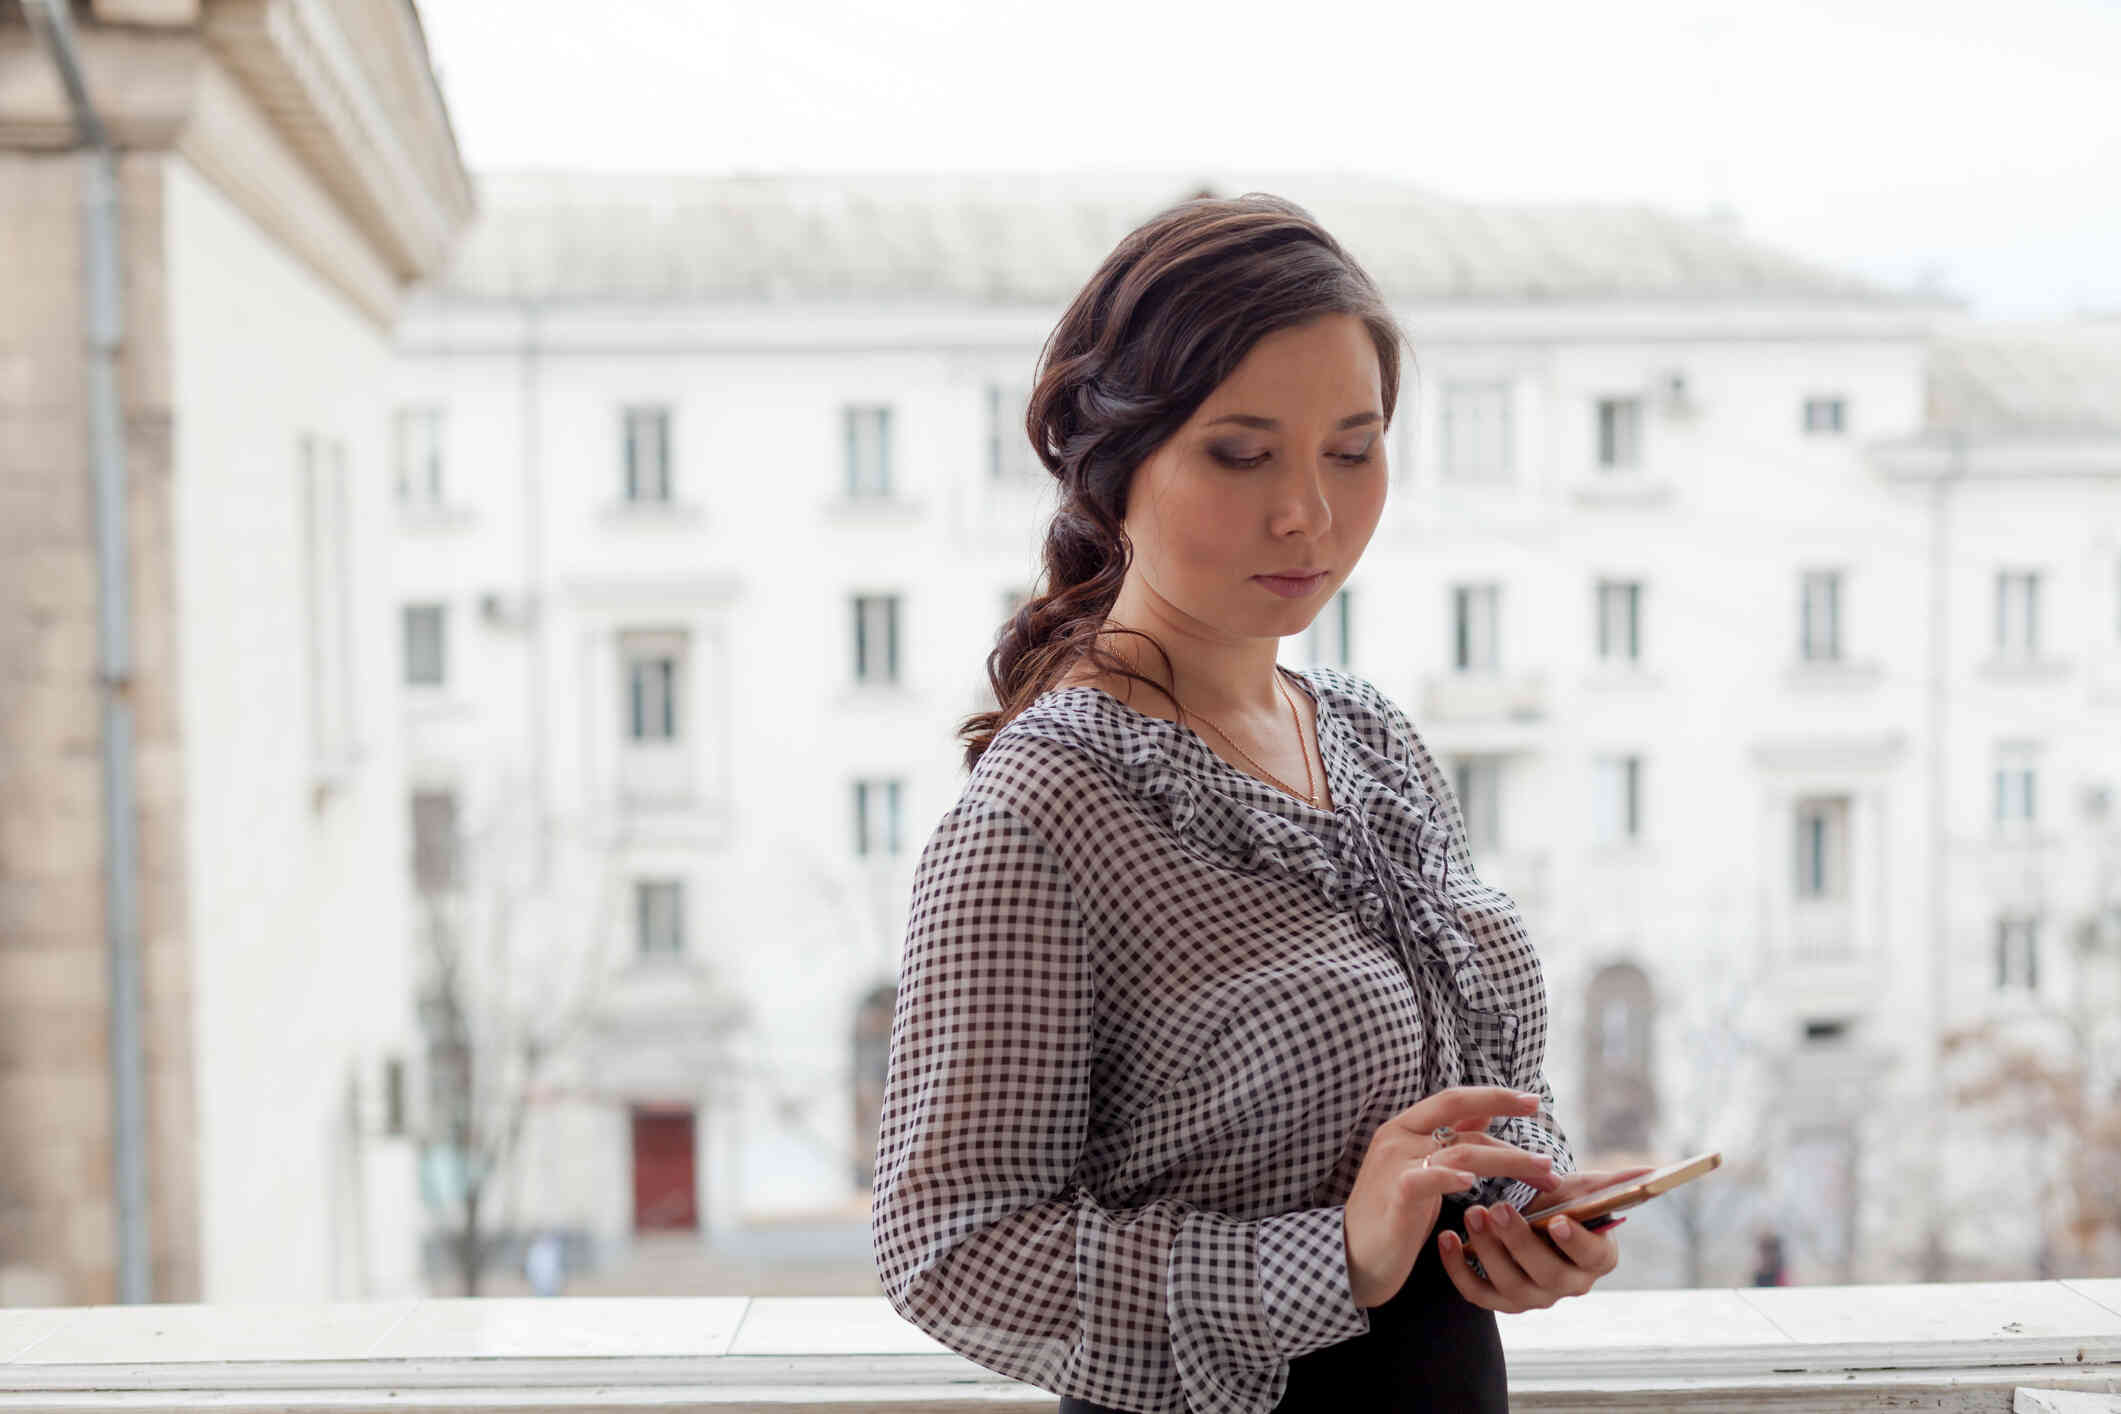 A woman in a checkerd shirt stands infront of a window and looks down at the cellphone in her hand.